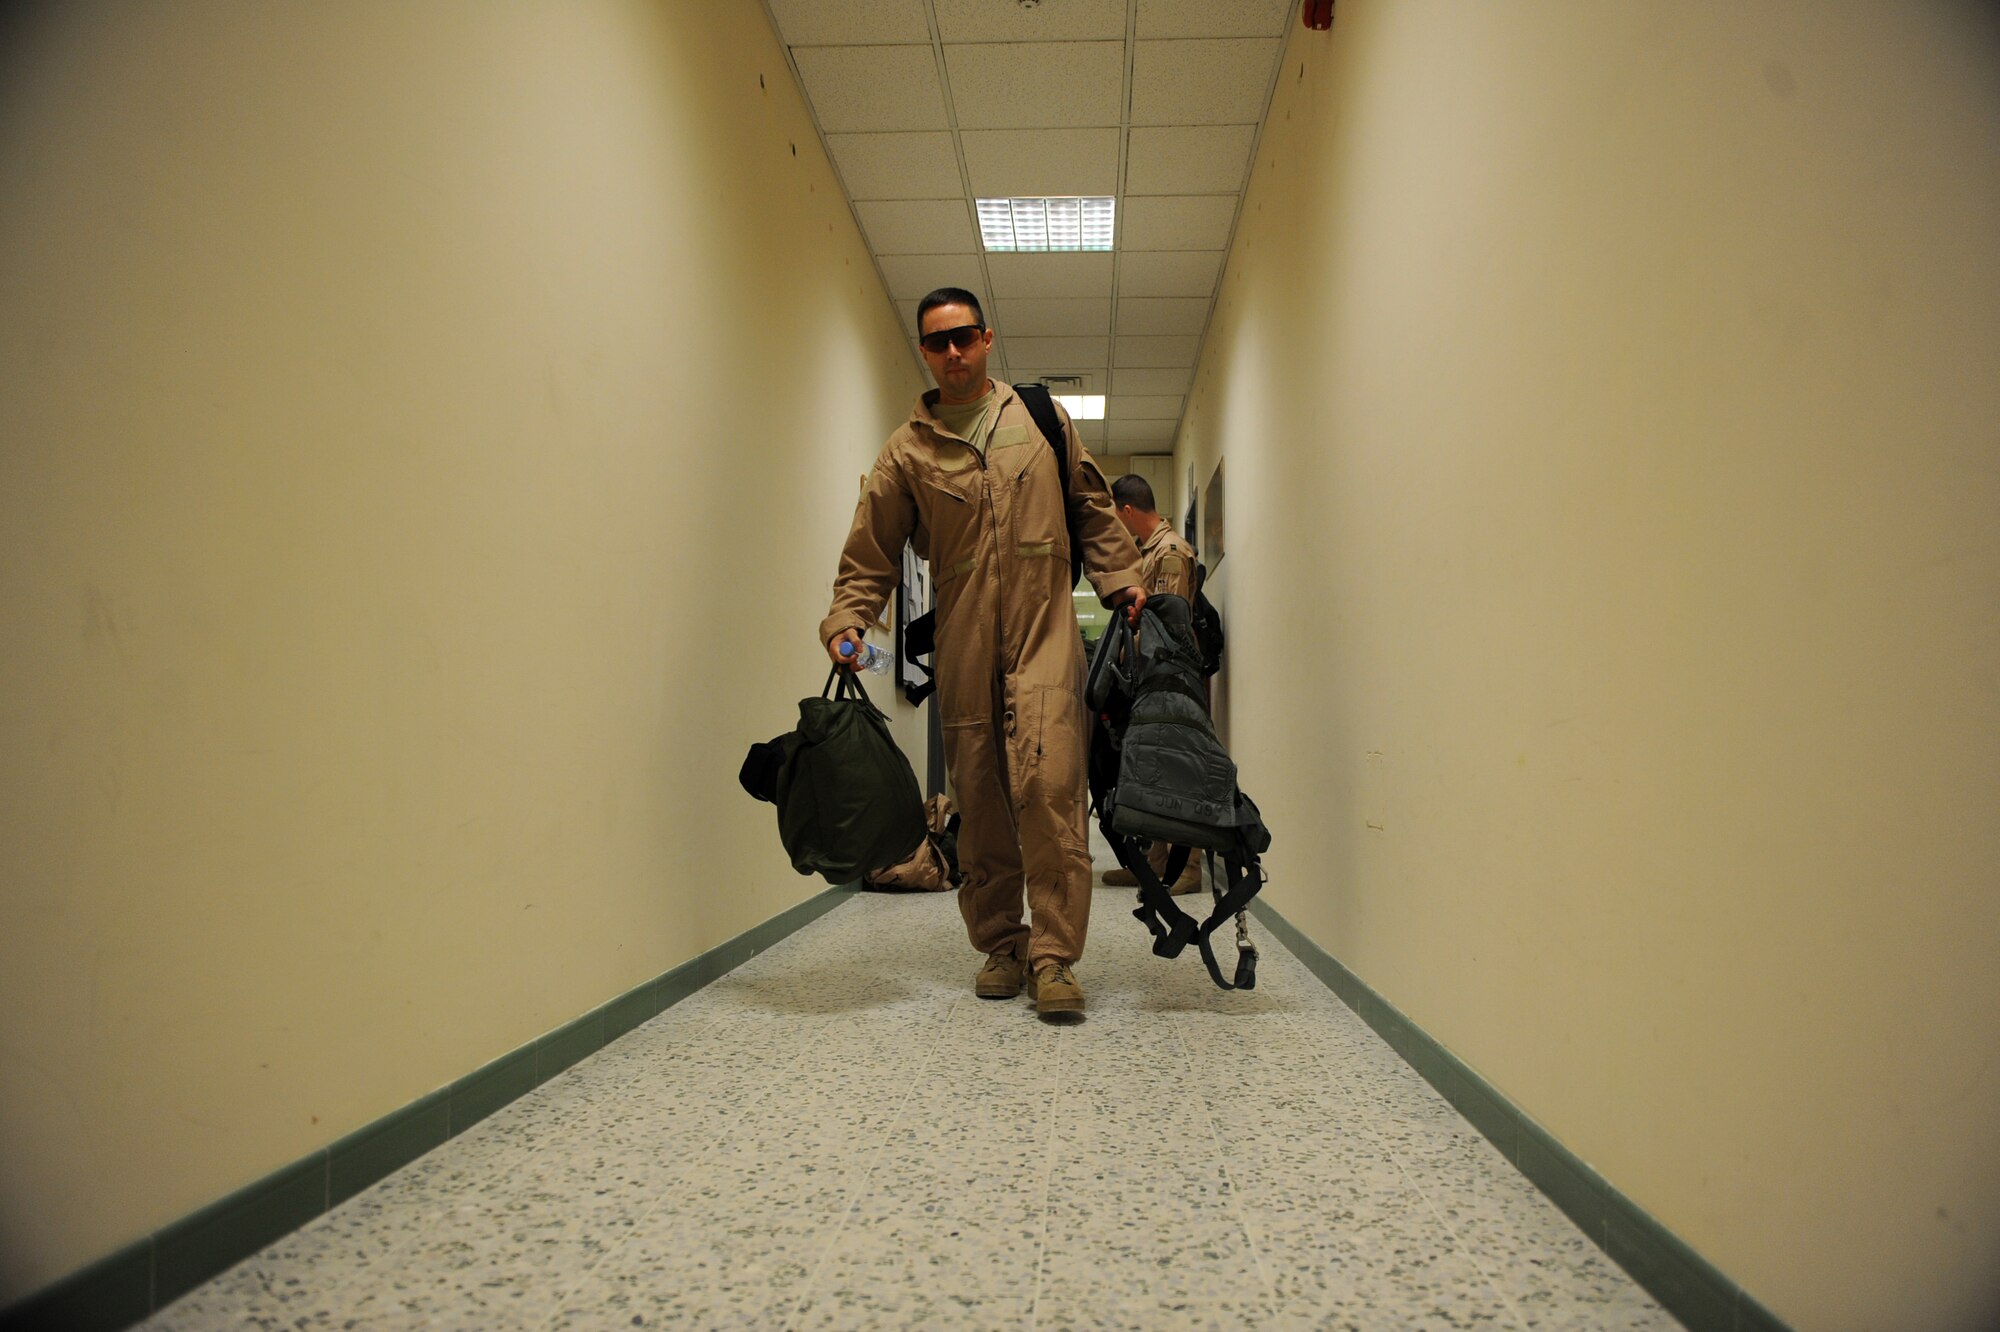 Maj. Nathan ?Gobot? Rowan, a B-1B Lancer pilot assigned to the 37th Expeditionary Bomb Squadron, heads to a crew bus to be transported to a B-1B bomber for the last mission of his six-month deployment Jan. 23, 2010, in Southwest Asia. Major Rowan and other personnel of the 37th EBS are deployed from Ellsworth Air Force Base, S.D. (U.S. Air Force photo/Staff Sgt. Manuel J. Martinez/Released)